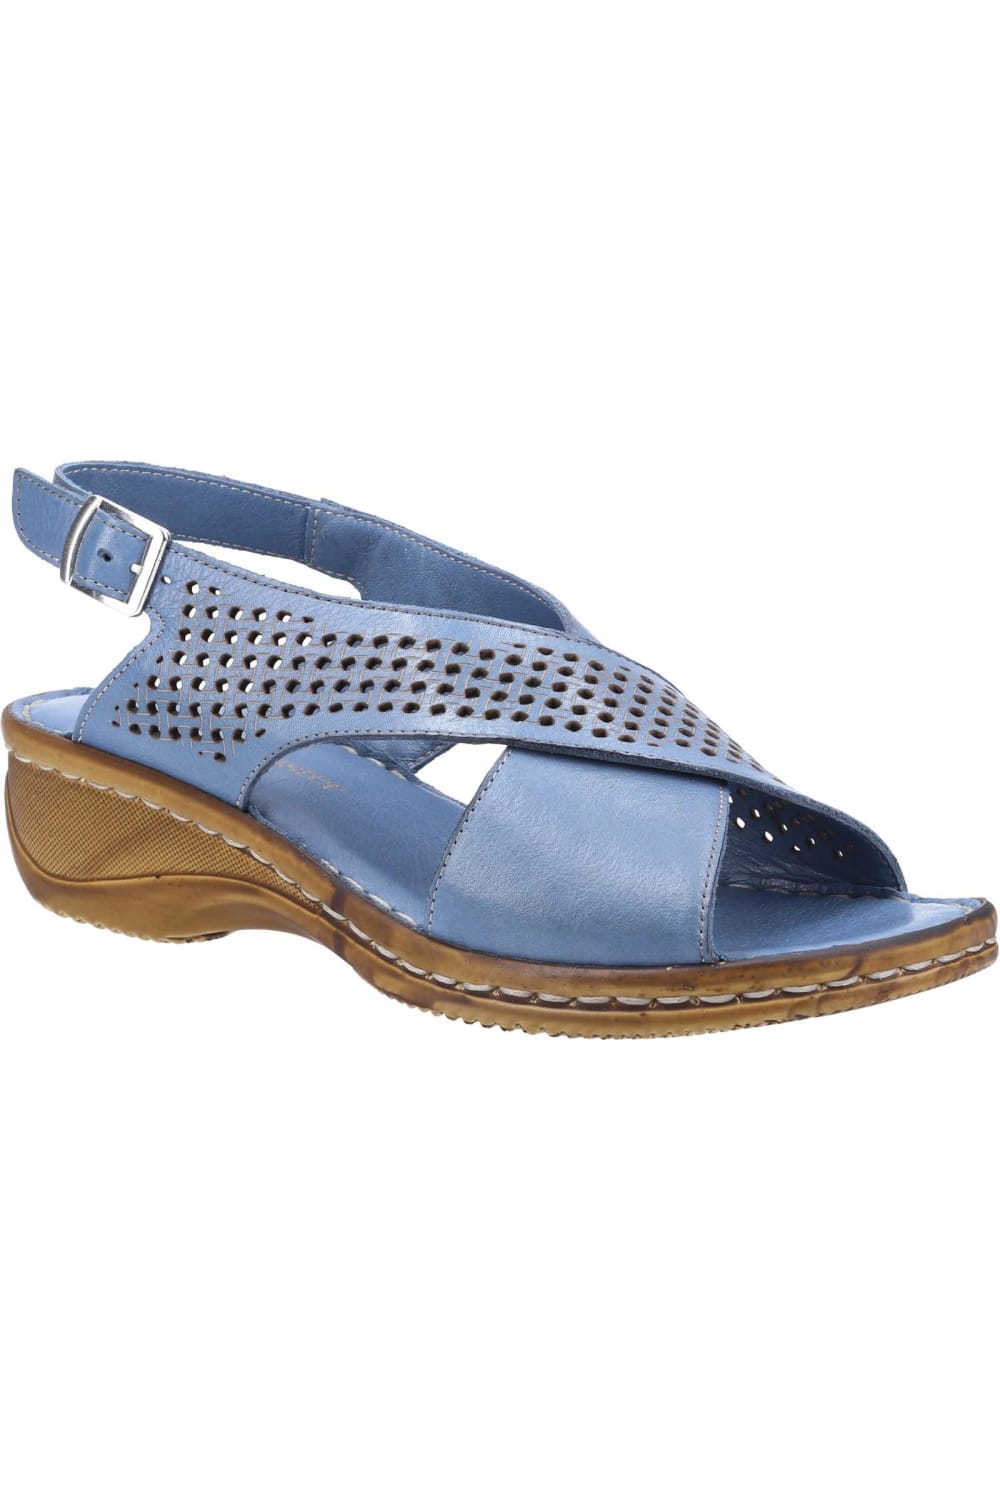 Womens/Ladies Judith Open Toe Leather Sandals - Blue